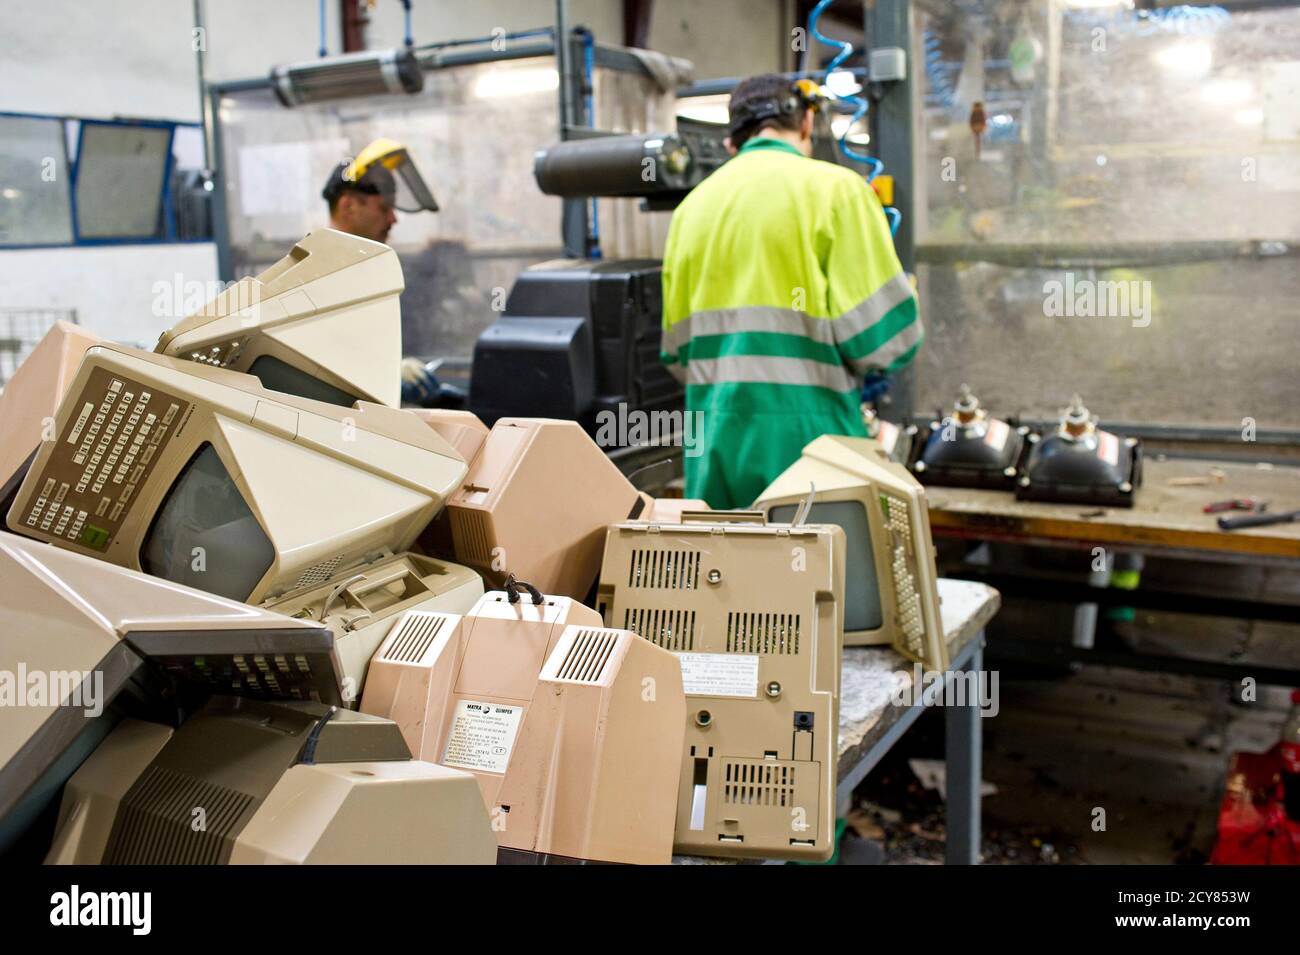 A man works behind a stack of French Minitel terminals which are to be broken down into its components for recycling in Portet-Sur-Garonne, southwestern France May 23, 2012. The Minitel, the box-like terminal with a keyboard and monochrome screen, was introduced on the market in 1982 by telecommunications operator France Telecom and used by the French to get information as a phone directory or to purchase train tickets. Although there are between 600,000 - 700,000 of the units still in use, the Minitel service will end on June 30, 2012.   REUTERS/Bruno Martin   (FRANCE - Tags: SCIENCE TECHNOLO Stock Photo